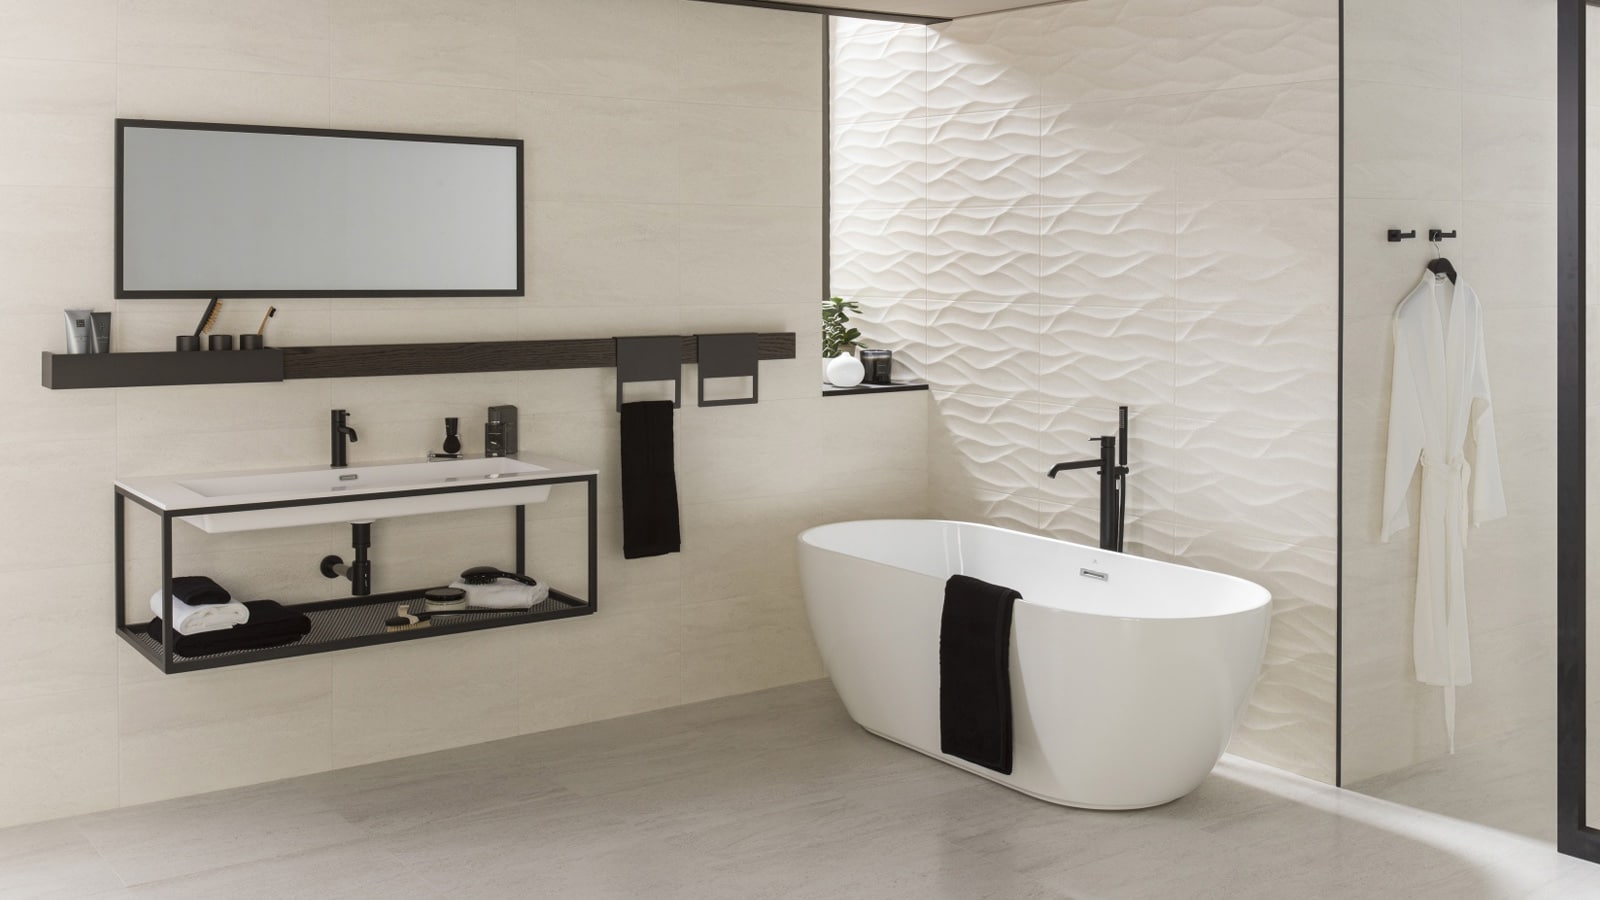 Textured wall tiles to transform your walls